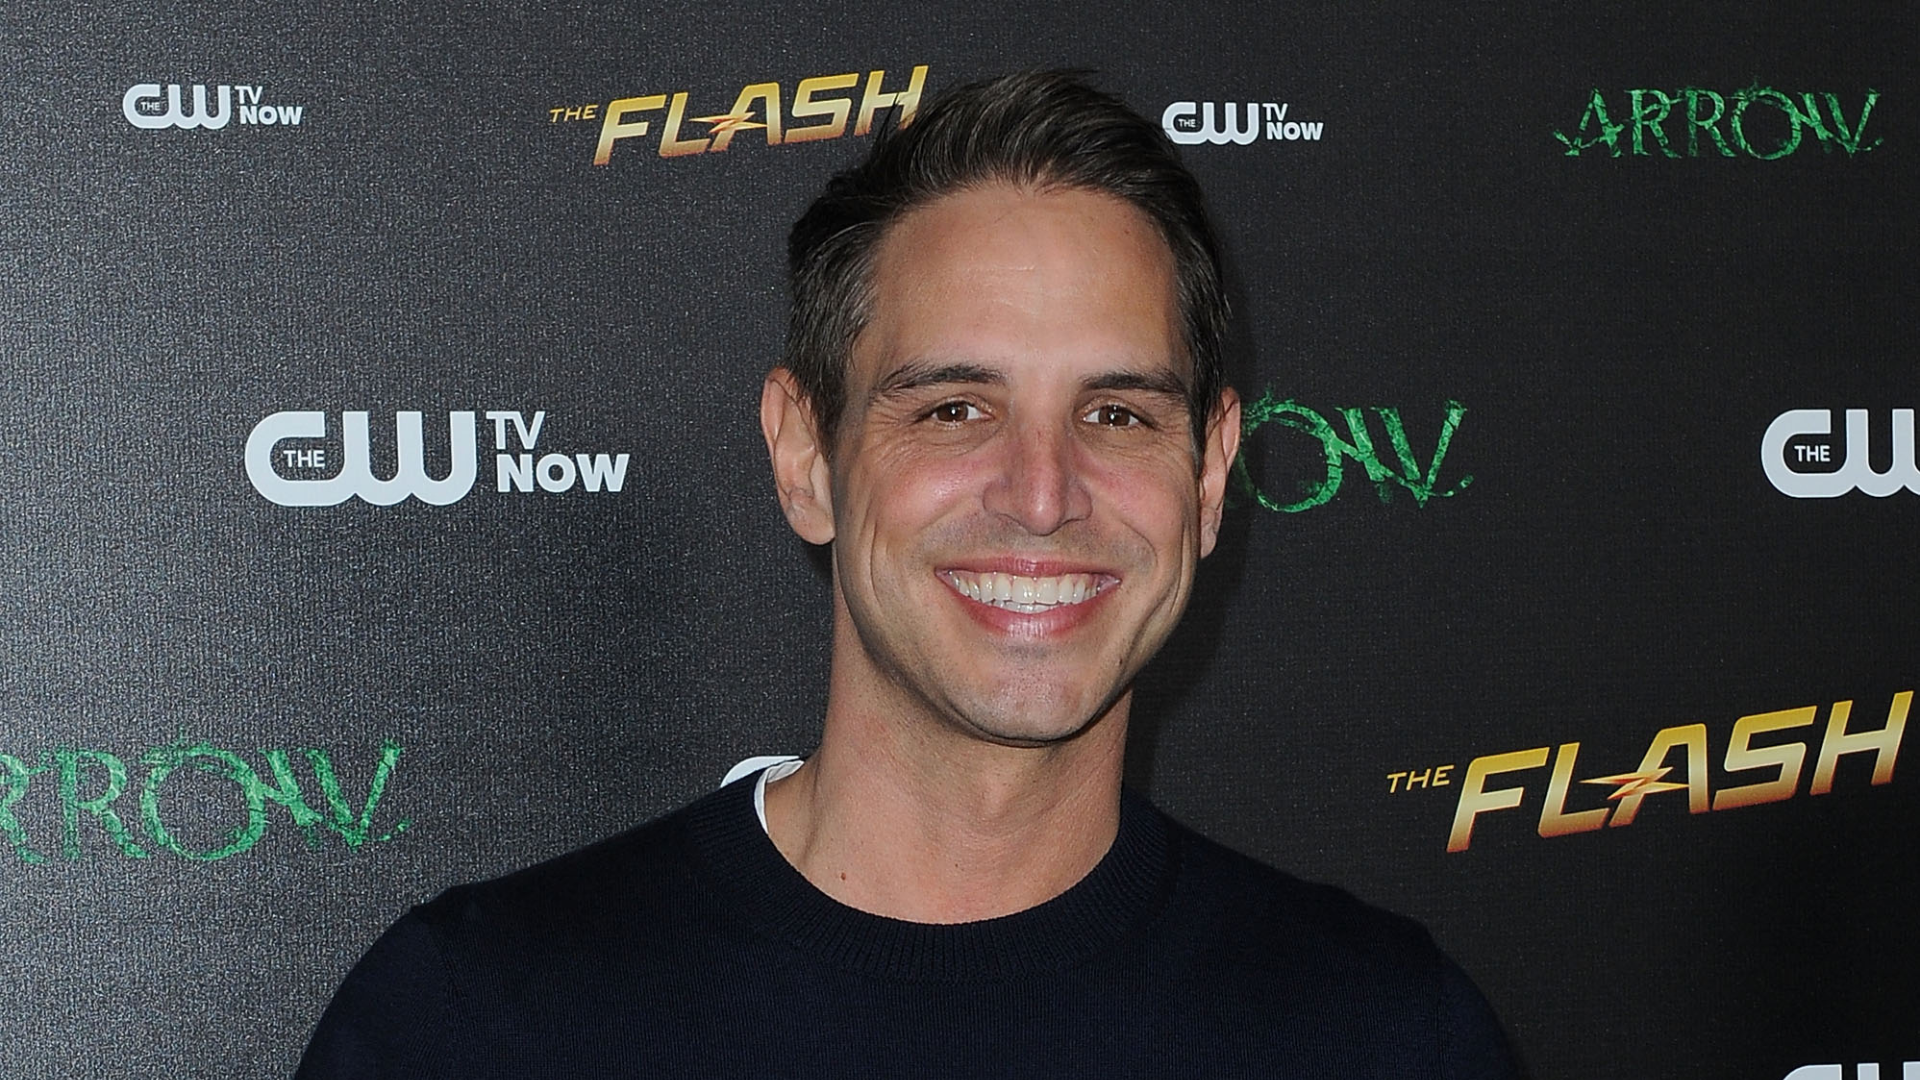 Arrowverse creator Greg Berlanti at a screening for Arrow and The Flash